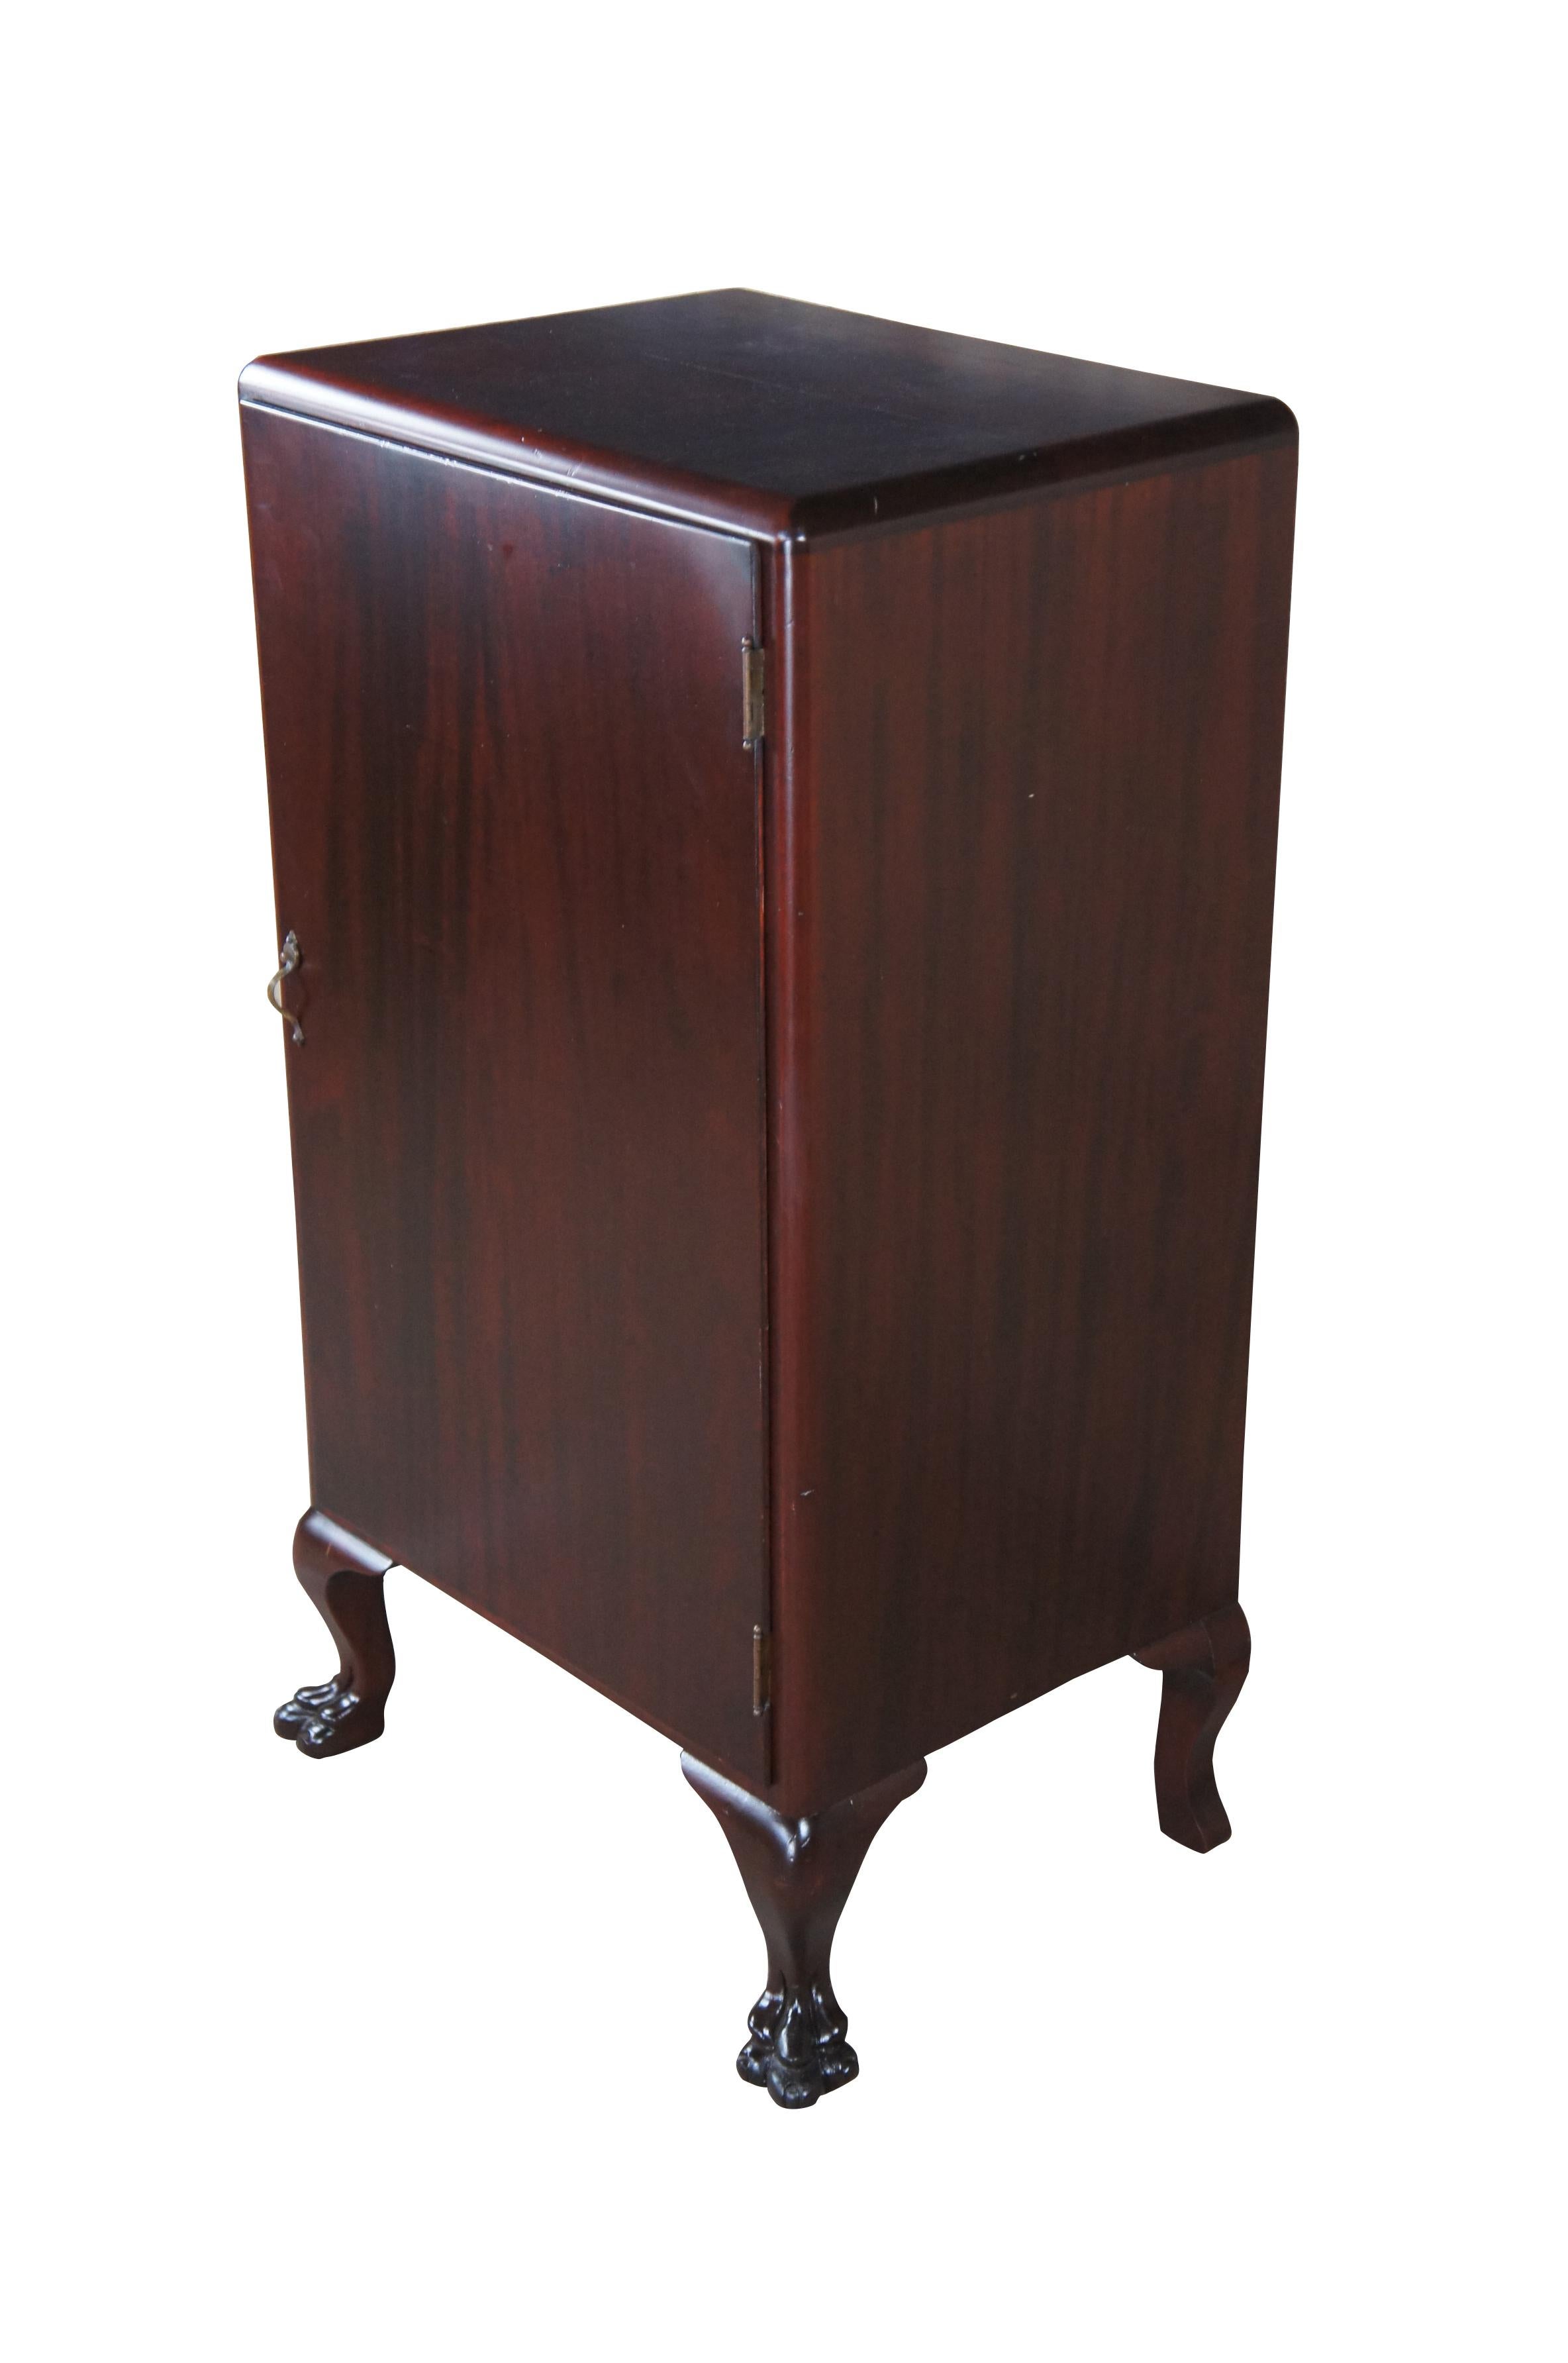 A quaint American Empire mahogany sheet music cabinet, circa 1900s.  Features a rectangular frame over cabriole legs leading to robust claw feet.  Opens via brass handle to three adjustable shelves. Shelves could be configured to accommodate